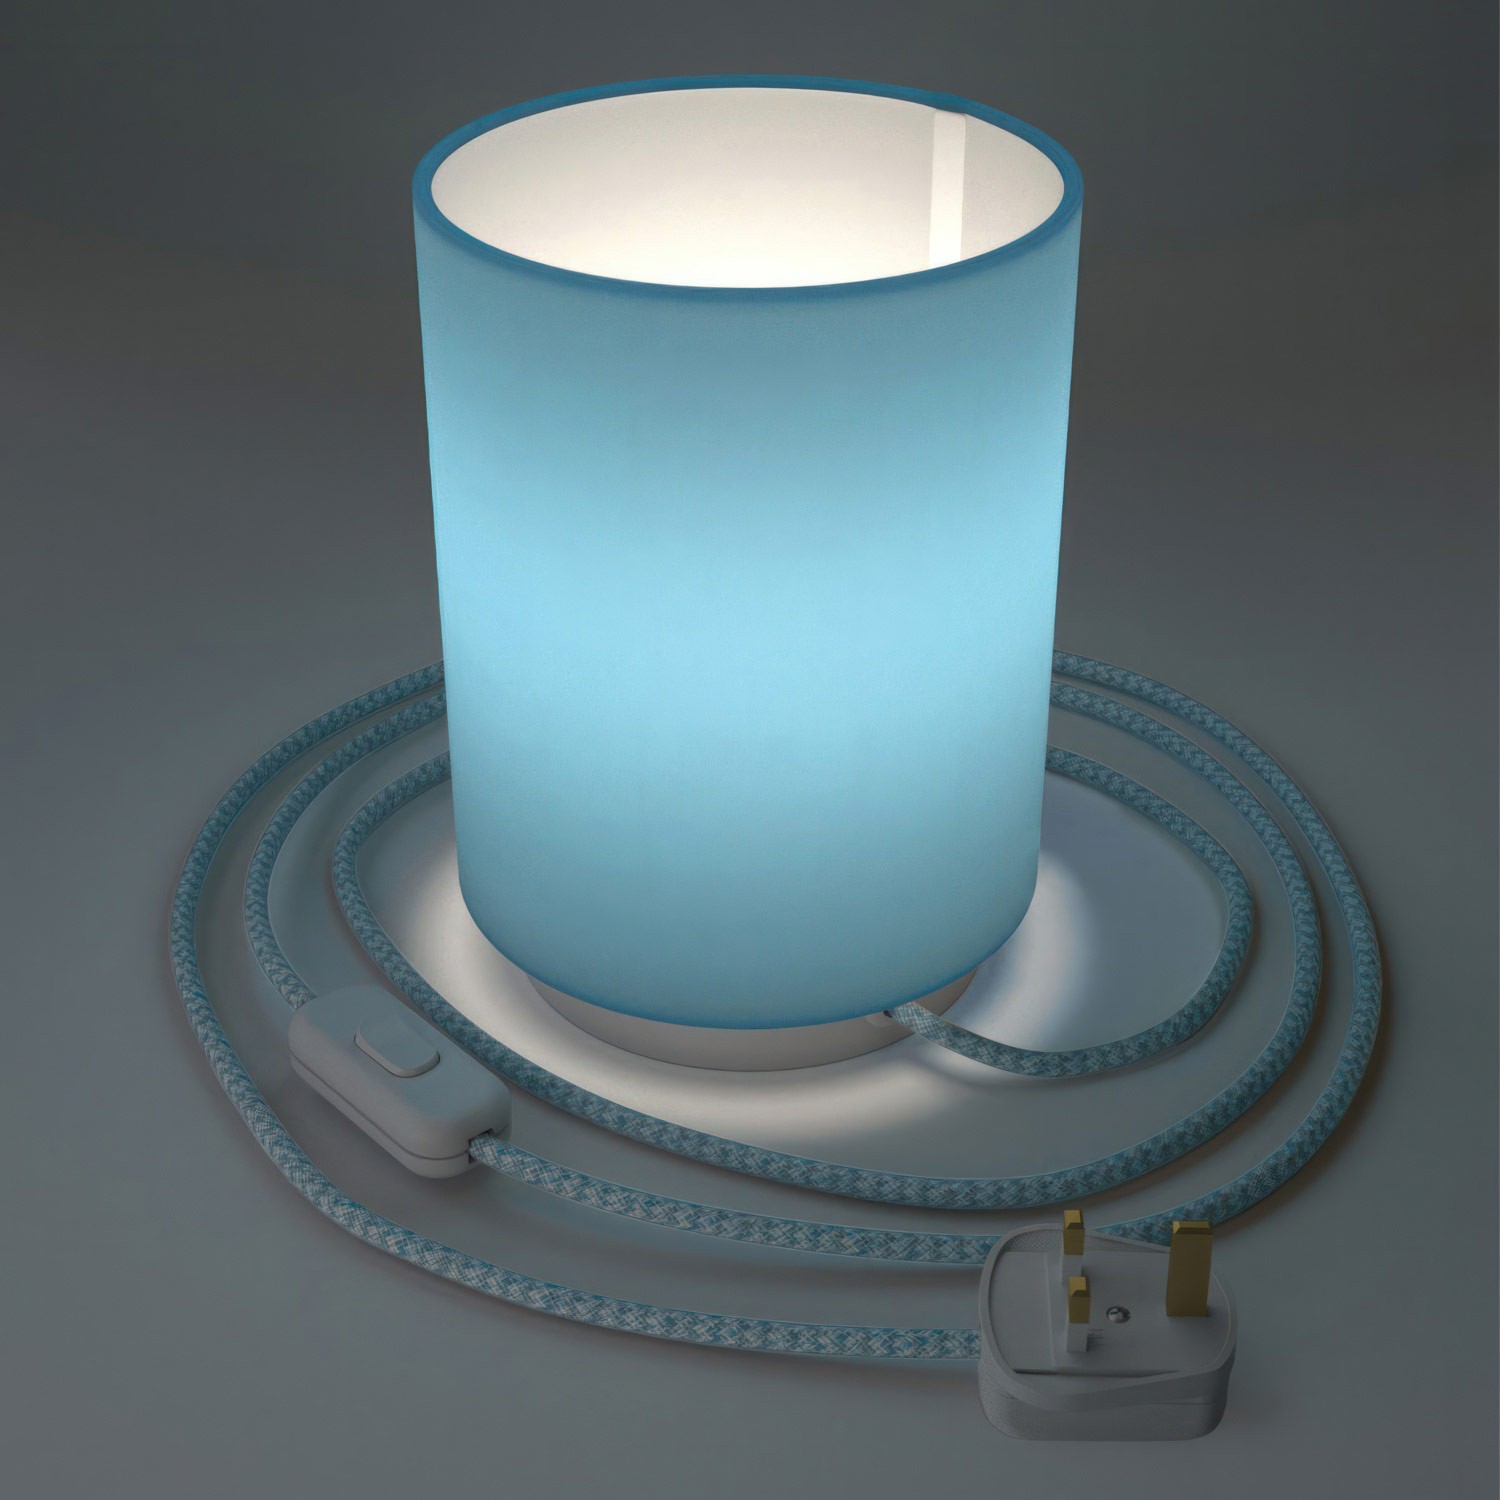 Posaluce in metal with Sky Blue Cilindro lampshade, complete with fabric cable, switch and UK plug